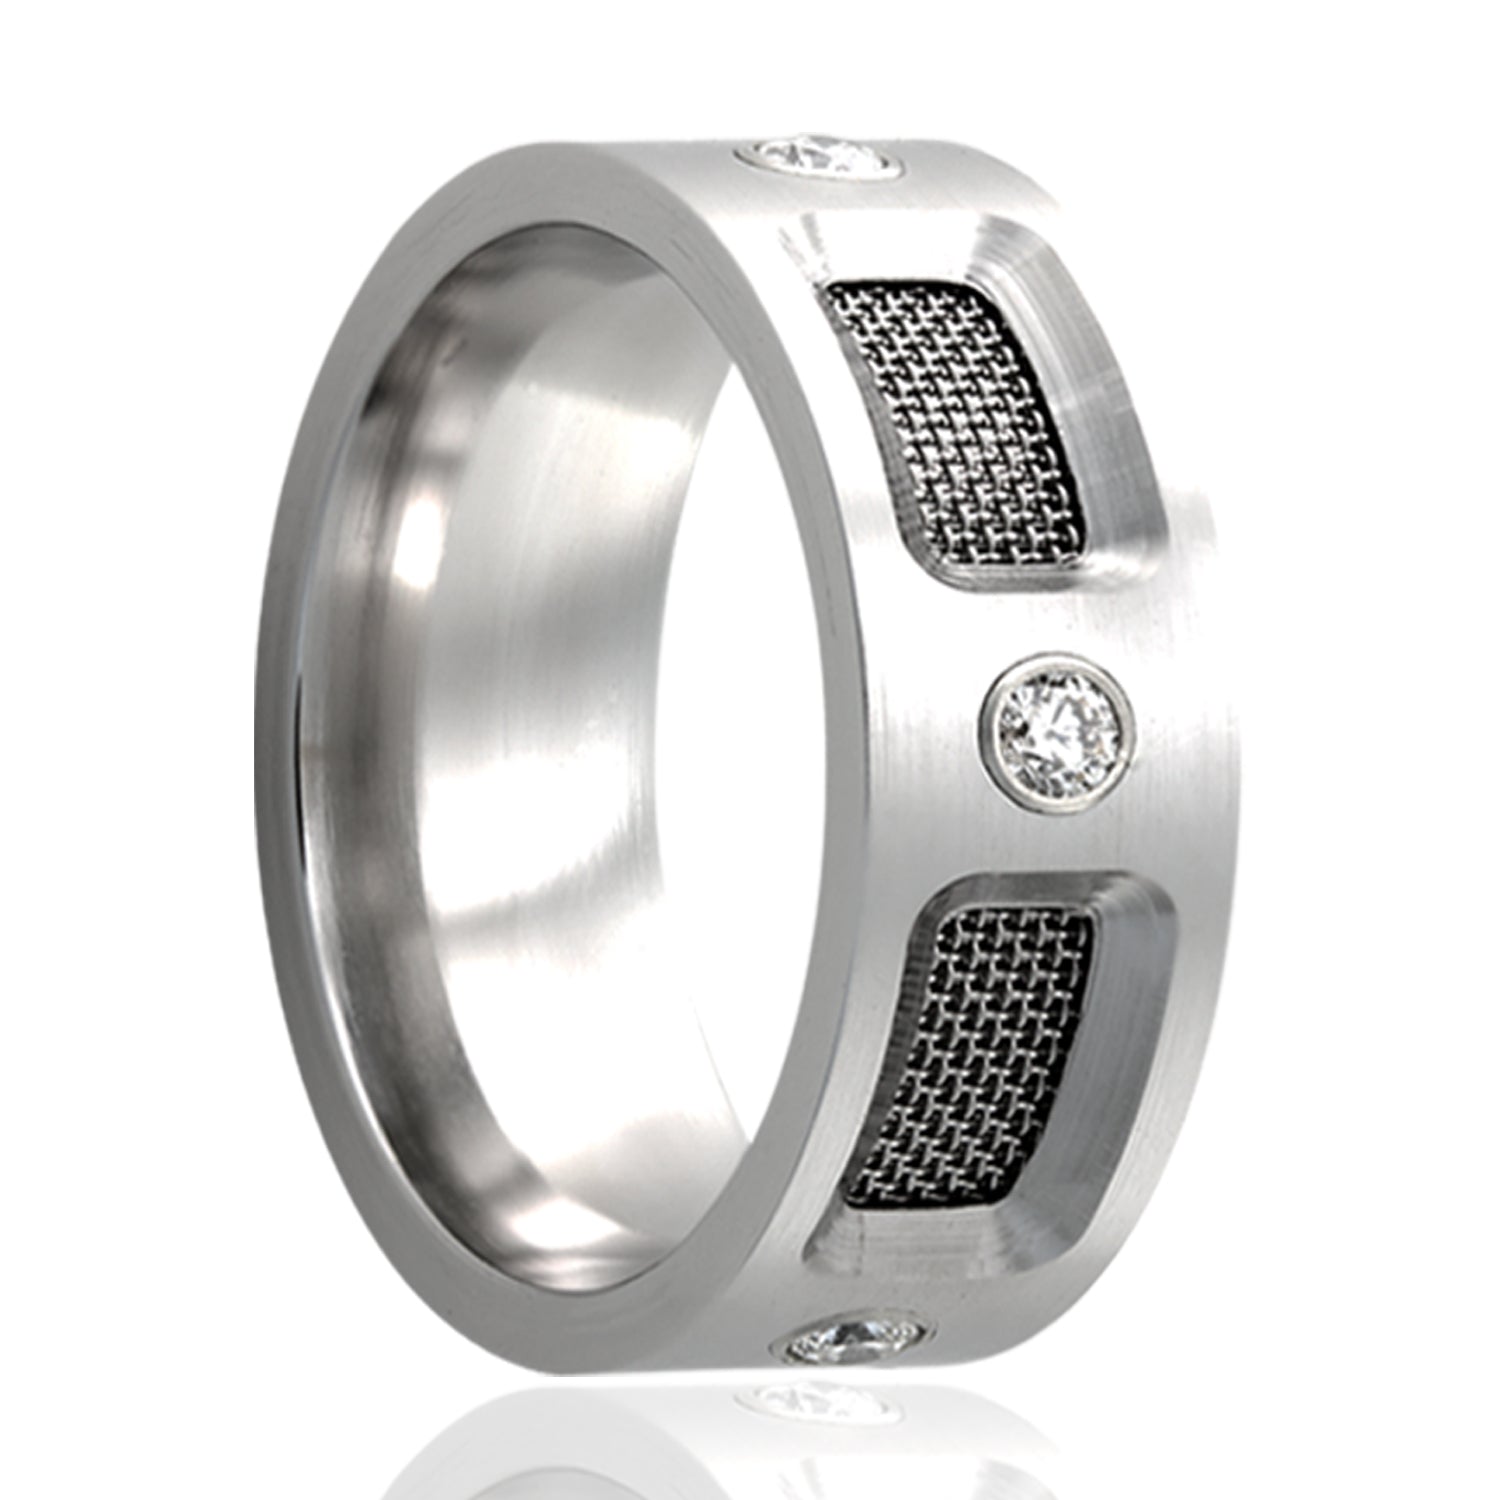 A cobalt men's wedding band with mesh inlay & diamonds displayed on a neutral white background.